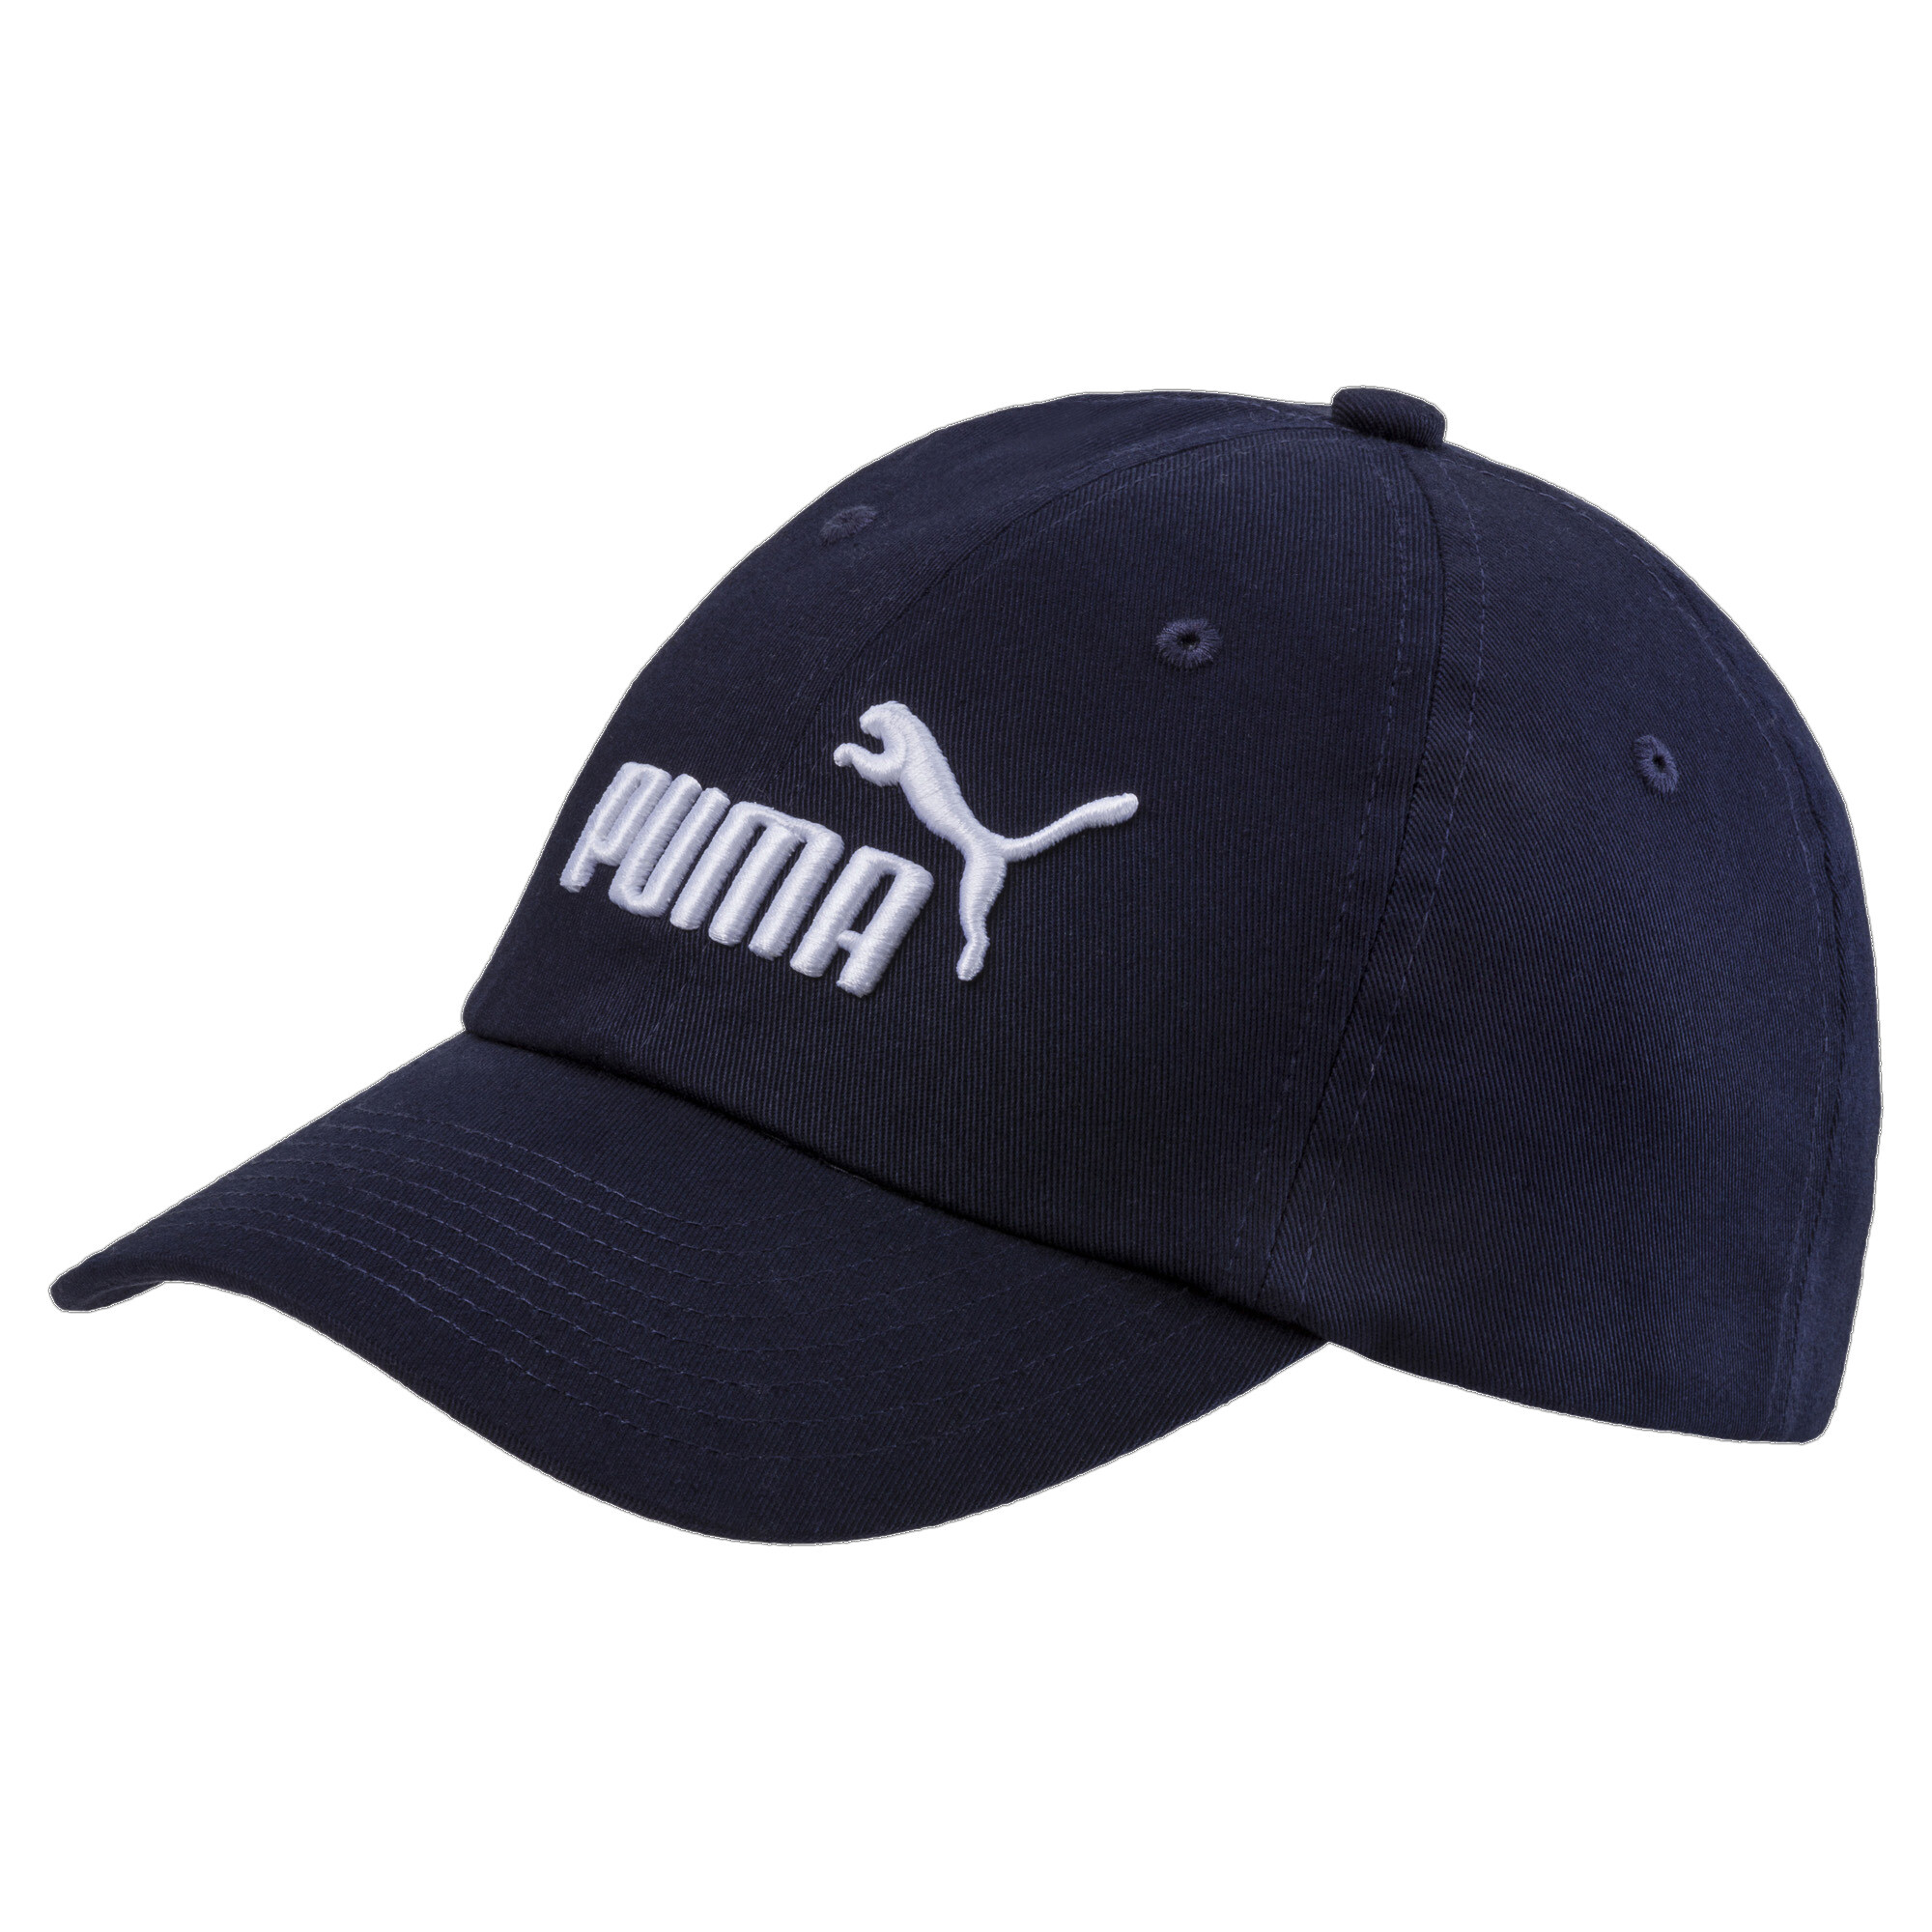 PUMA ESS Woven Cap In Blue, Size Youth